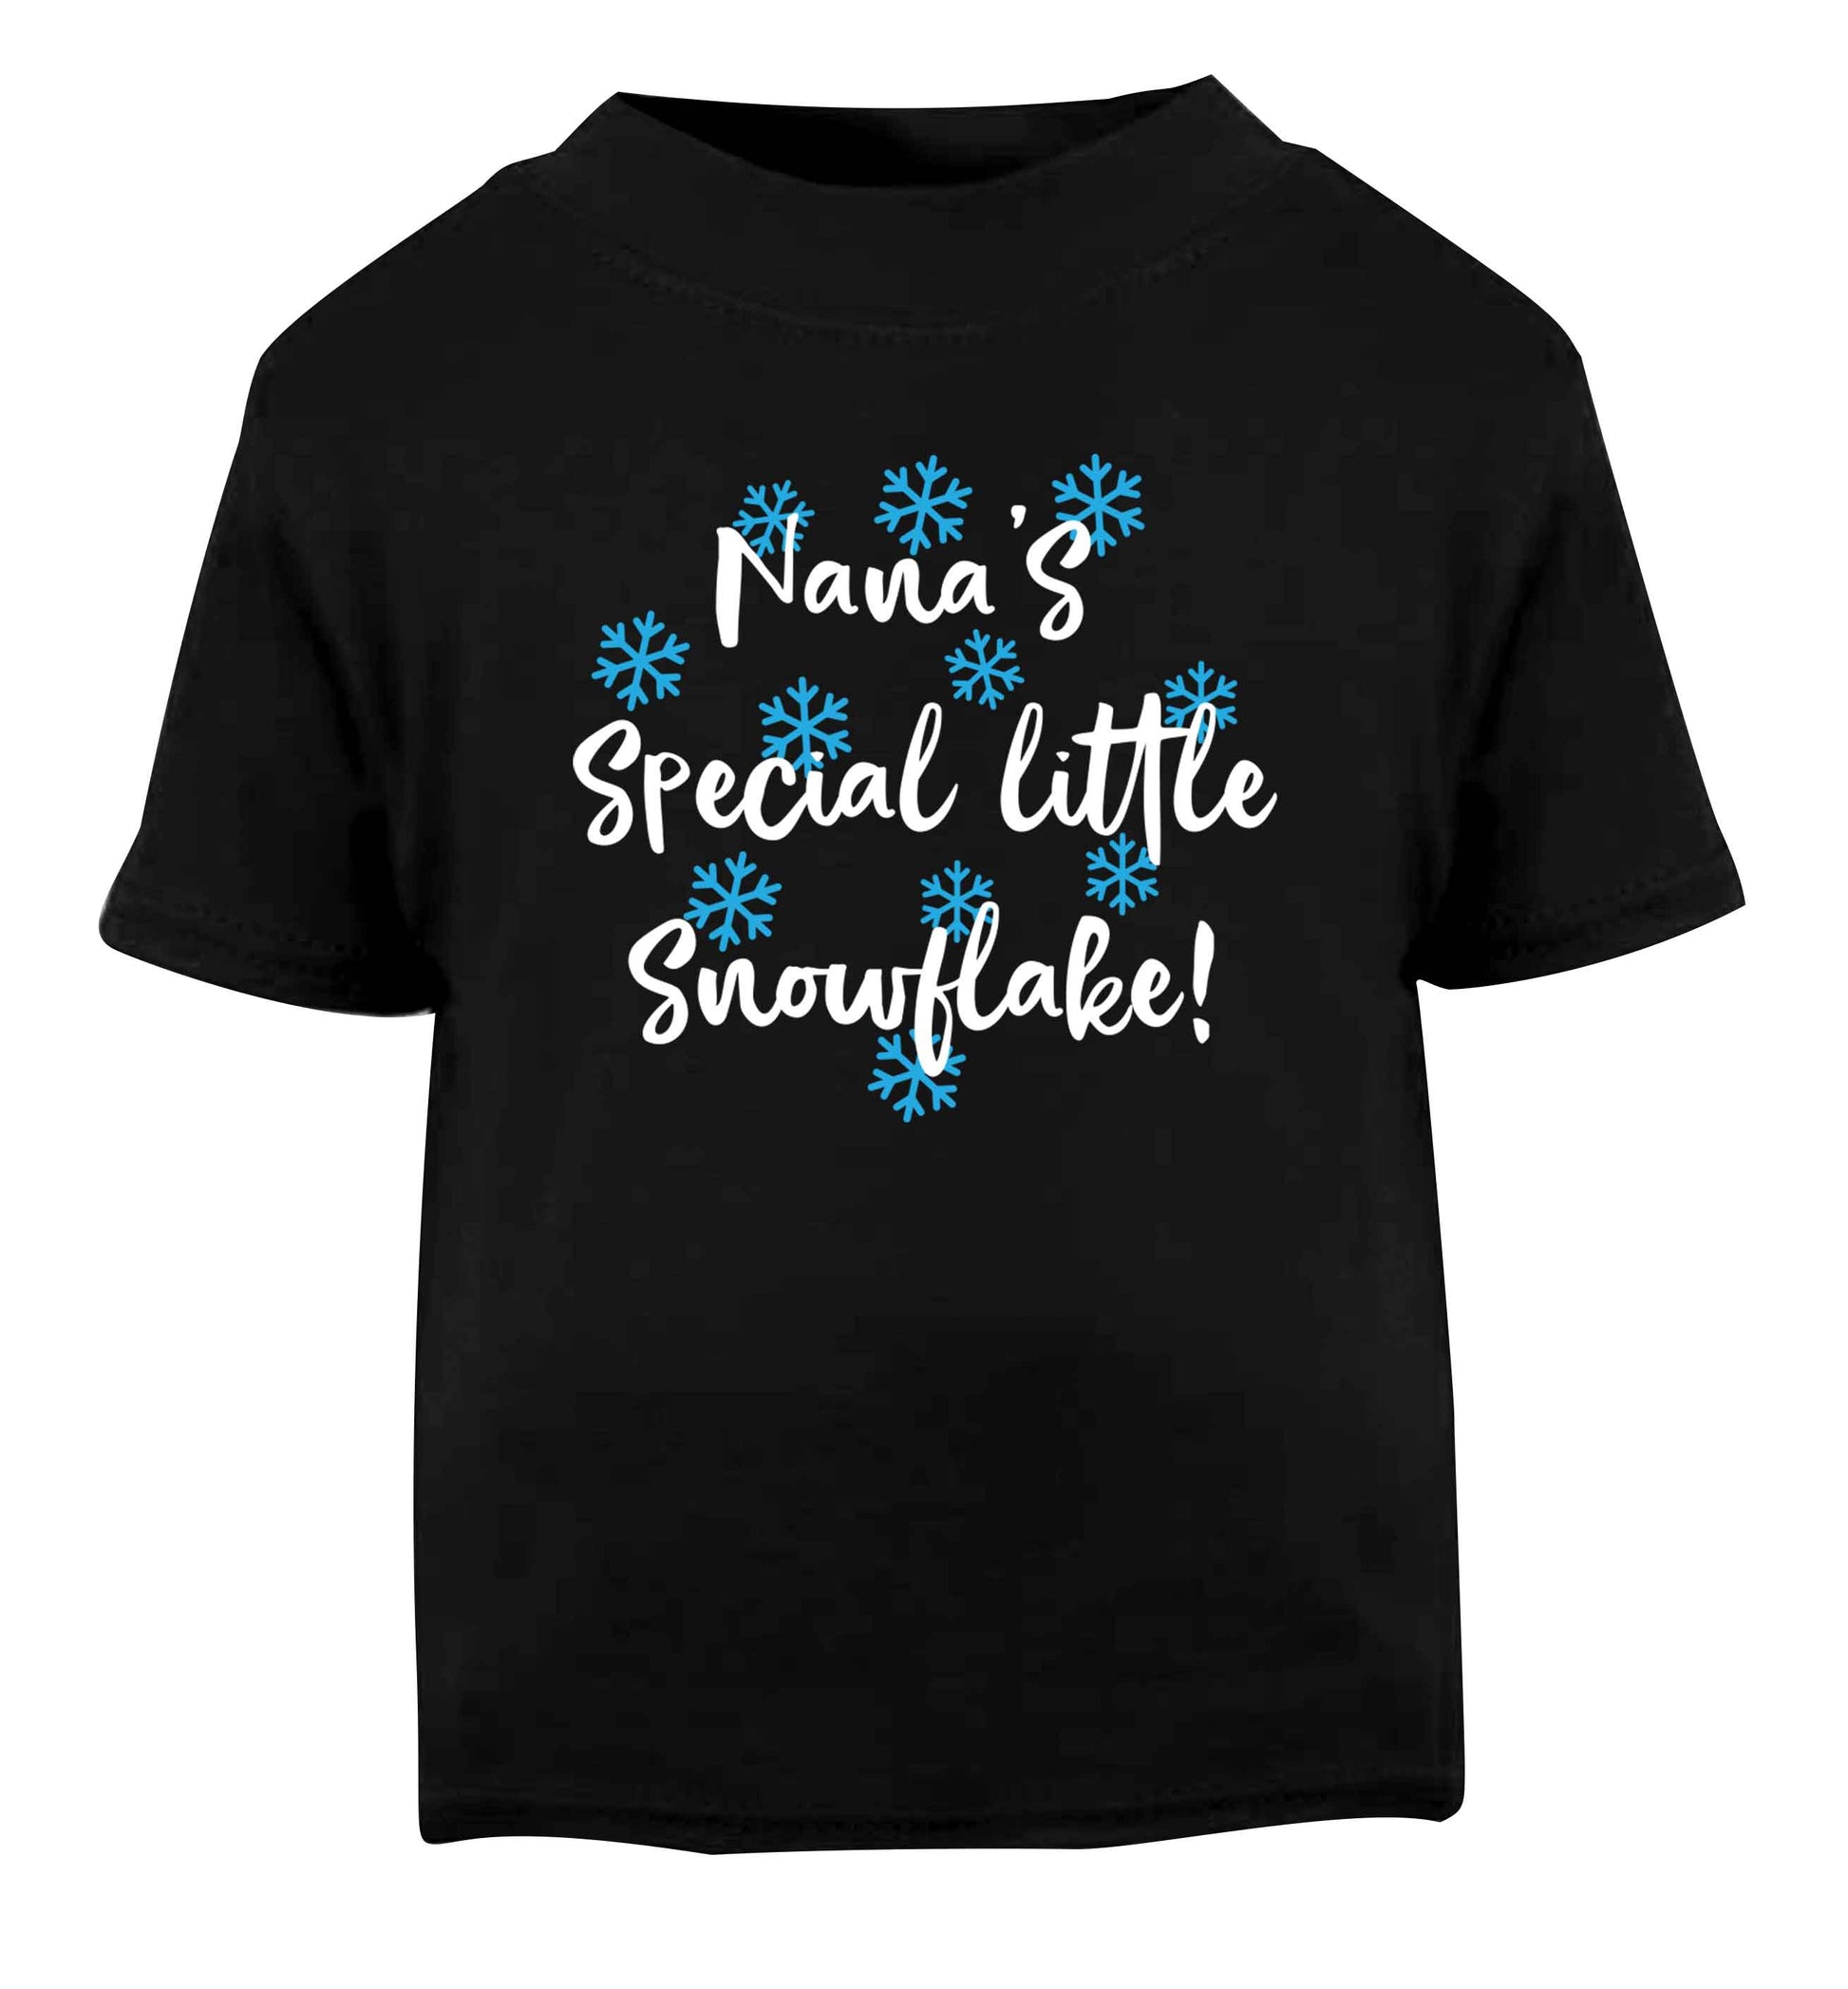 Nana's special little snowflake Black Baby Toddler Tshirt 2 years